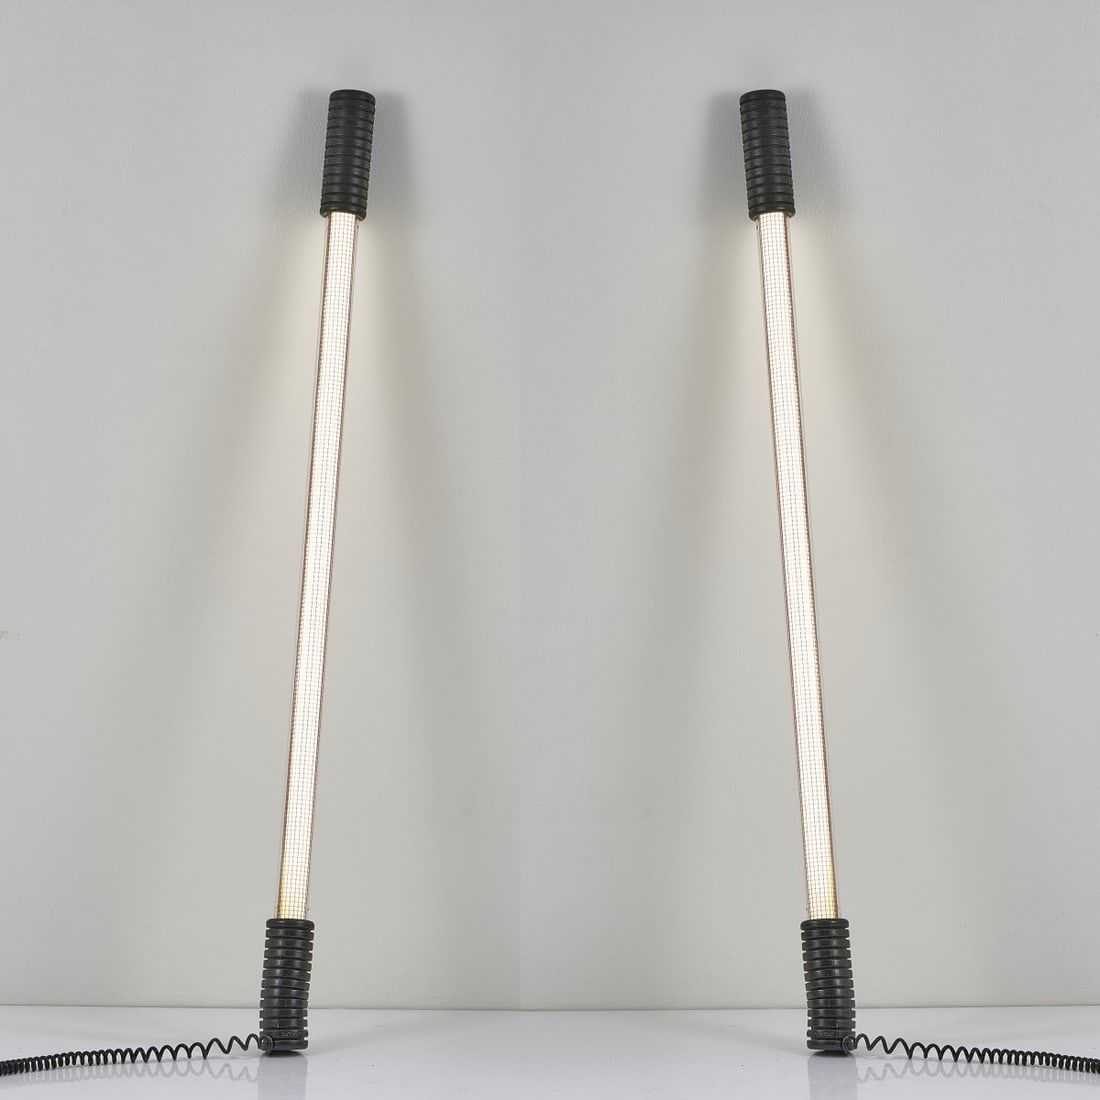 A pair of Easylight floor lamps dating to 1979, which Philippe Starck designed for Electroma, made €13,000 ($13,855) plus the buyer’s premium in October 2023. Image courtesy of Quittenbaum Kunstauktionen GmbH and LiveAuctioneers.